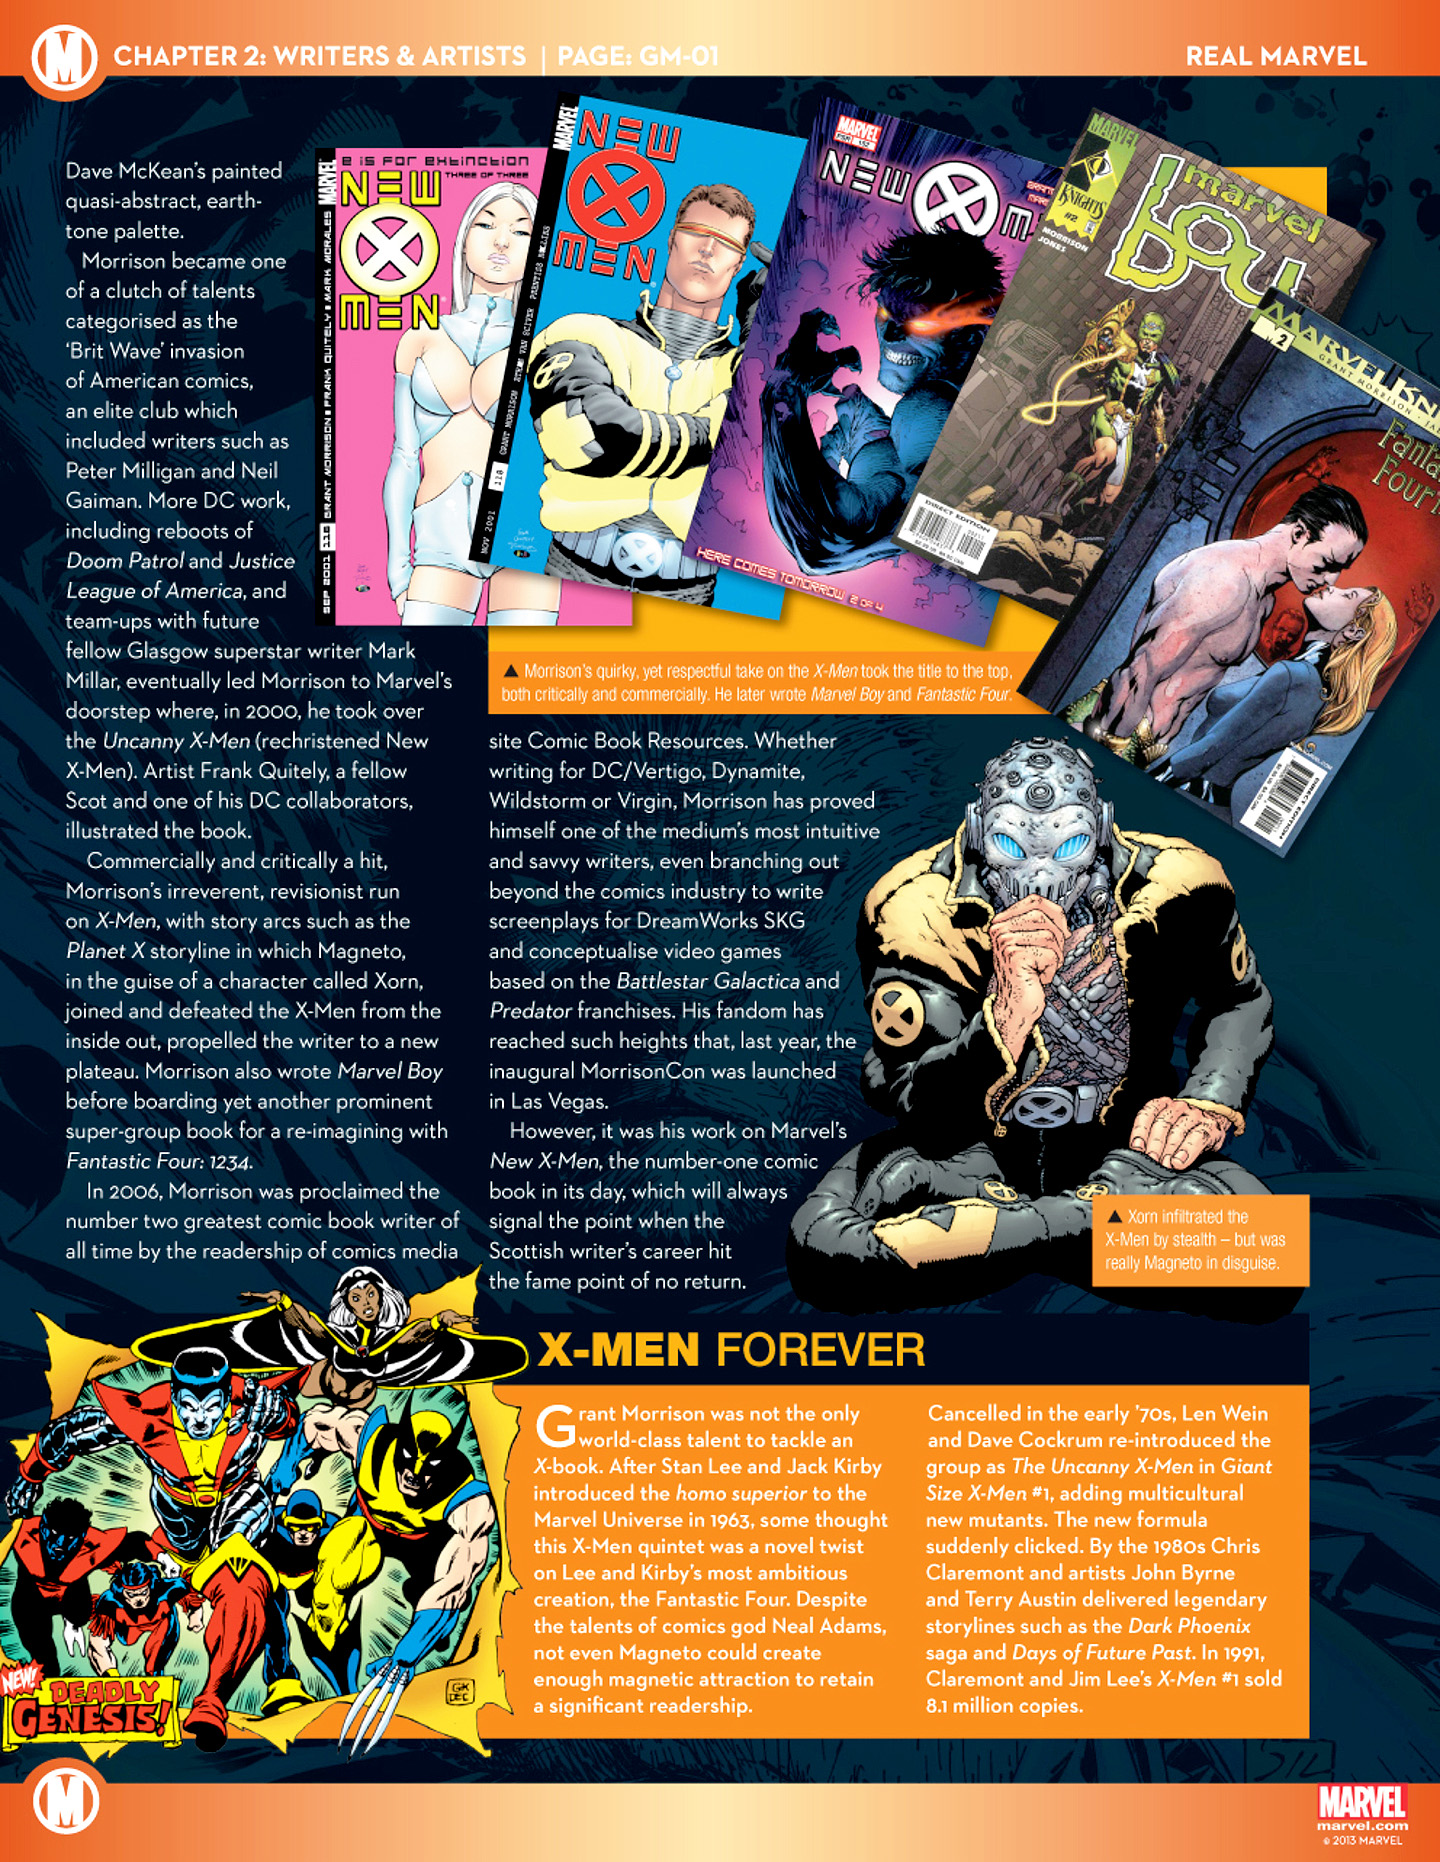 Read online Marvel Fact Files comic -  Issue #23 - 23